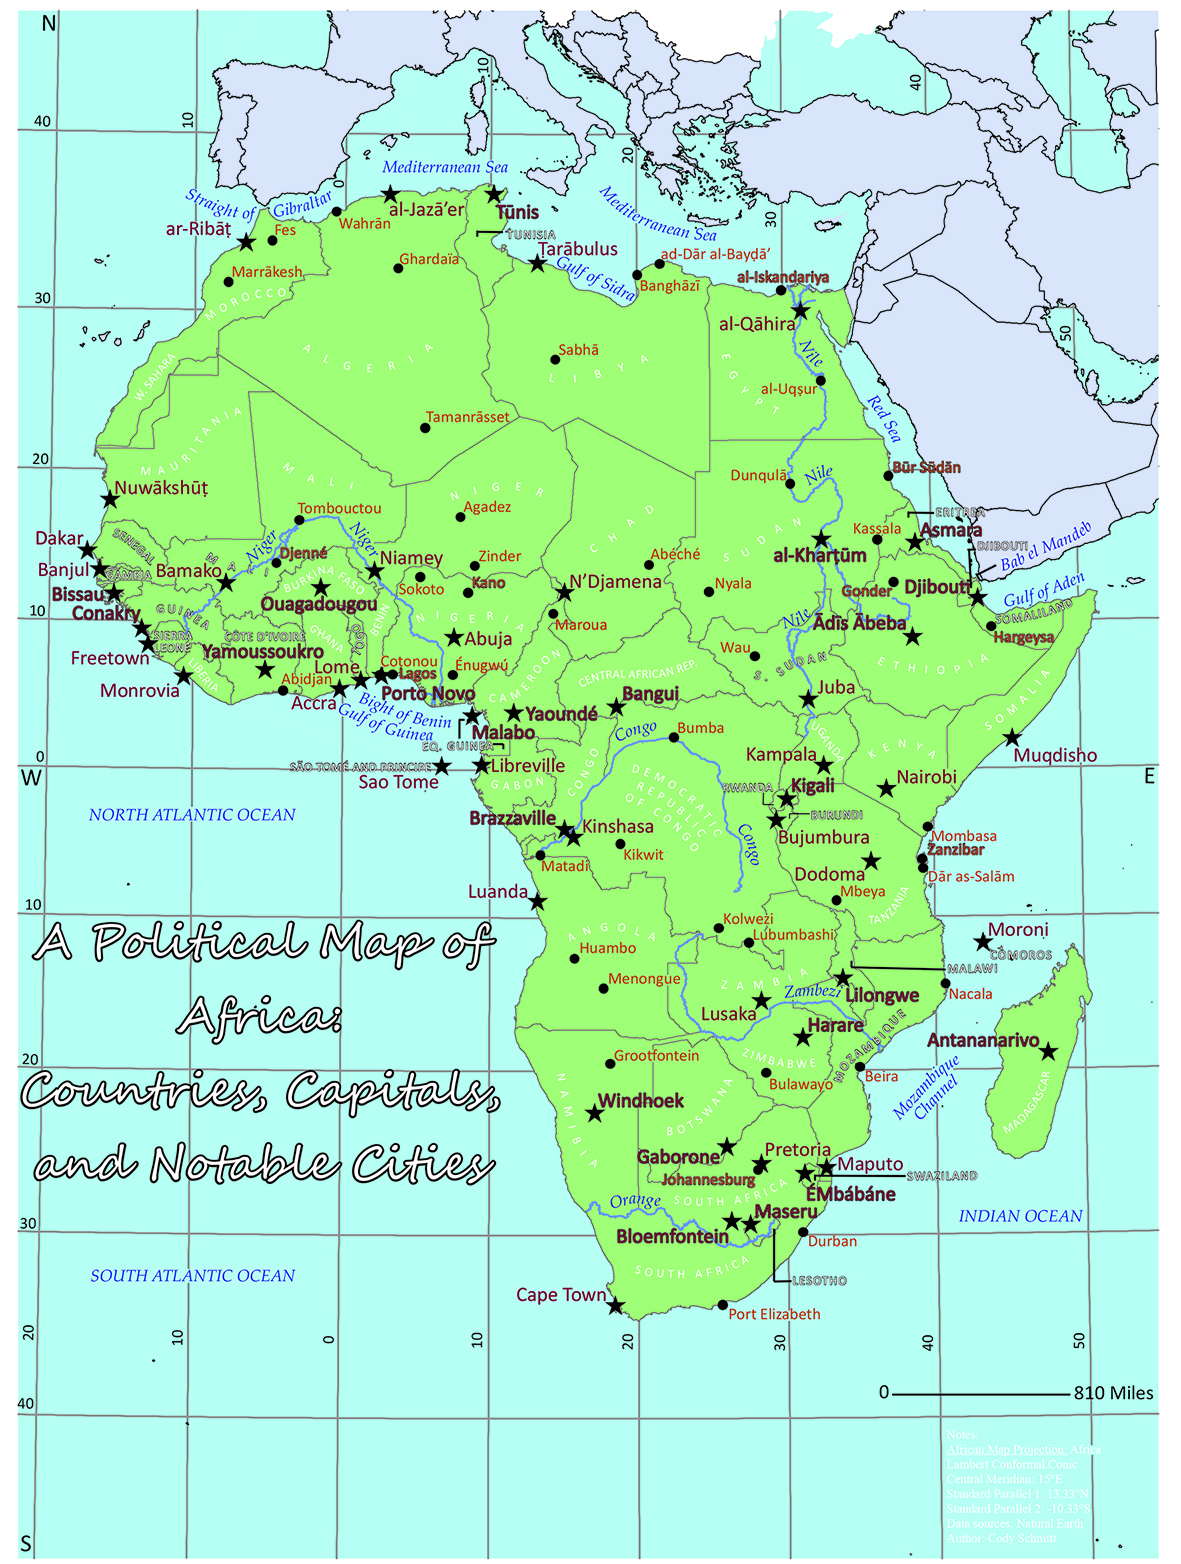 A Political Map of Africa